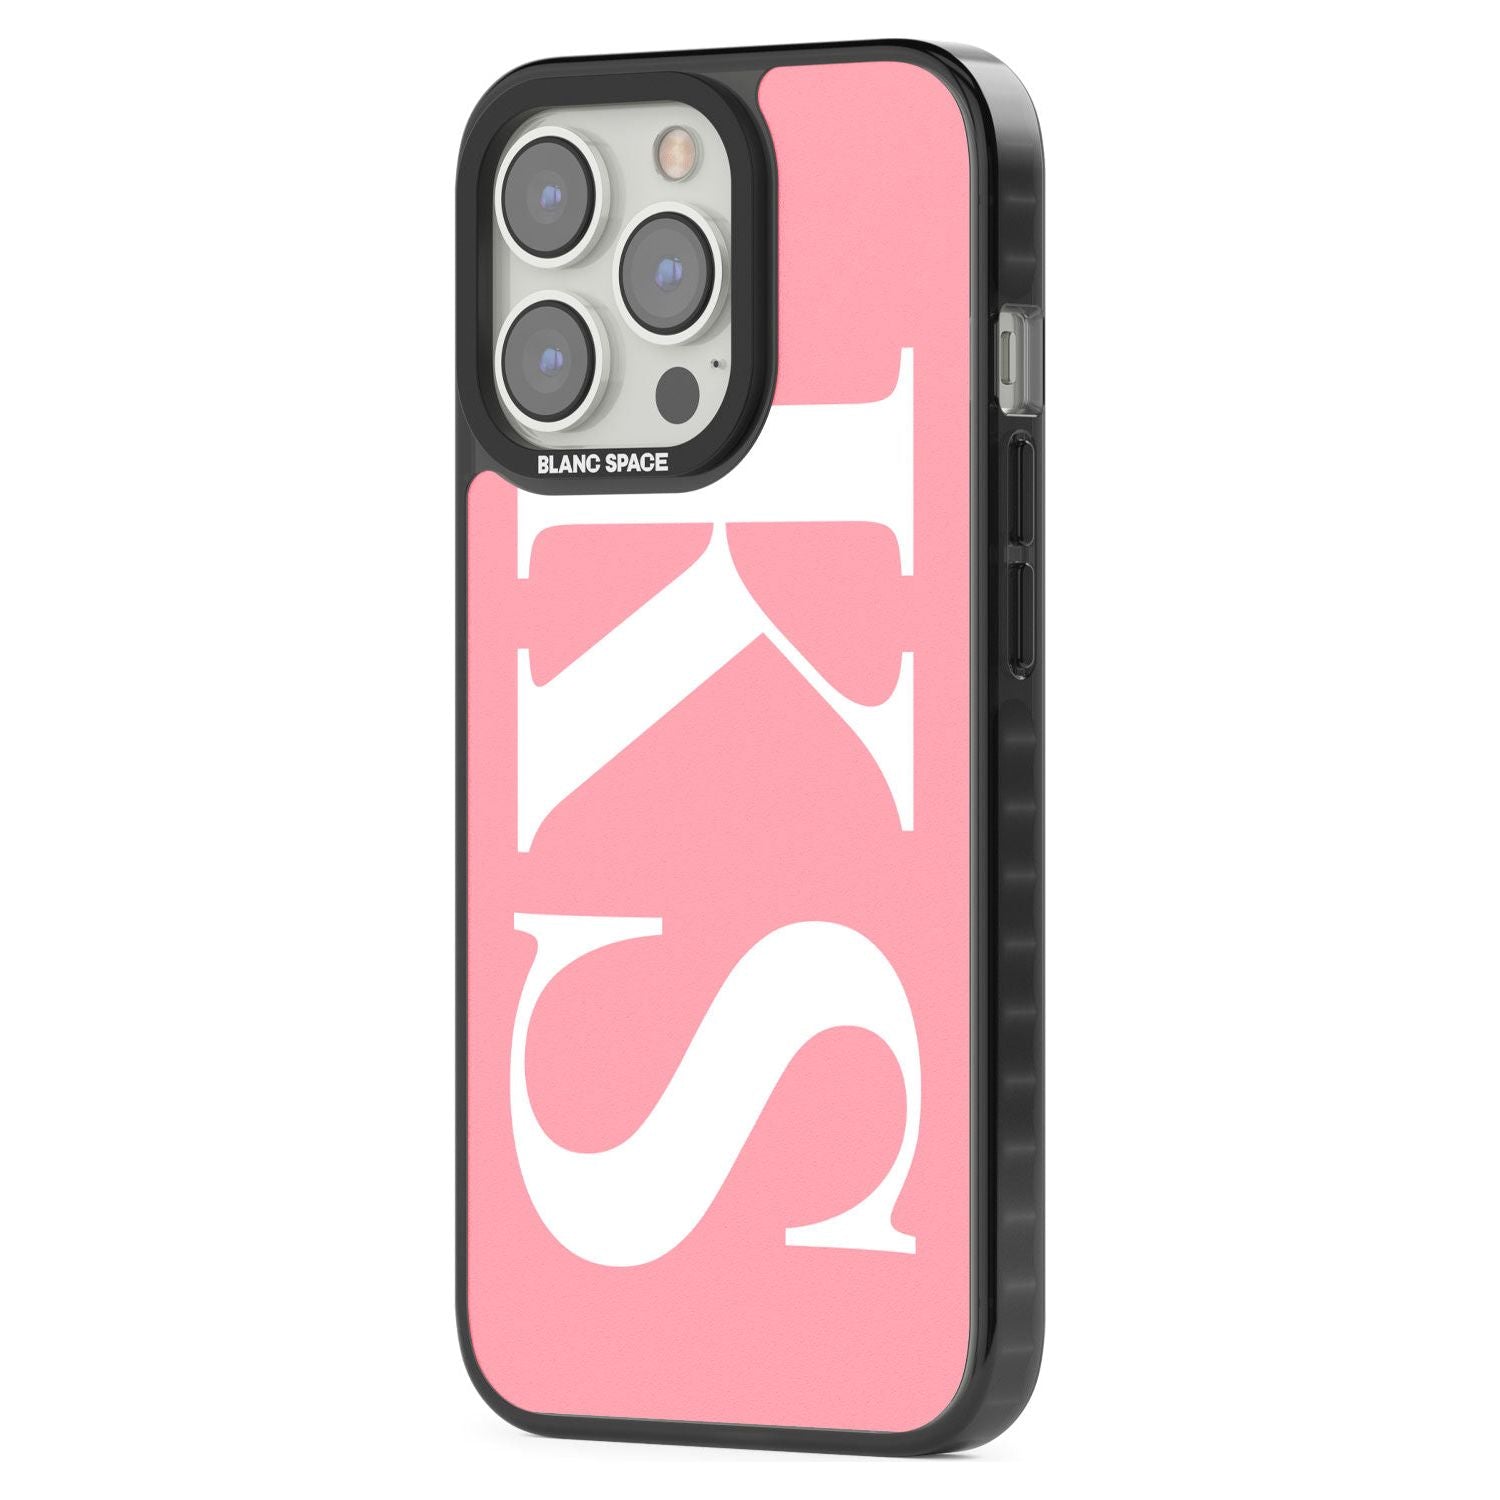 Personalised White & Pink Letters Custom Phone Case iPhone 15 Pro Max / Black Impact Case,iPhone 15 Plus / Black Impact Case,iPhone 15 Pro / Black Impact Case,iPhone 15 / Black Impact Case,iPhone 15 Pro Max / Impact Case,iPhone 15 Plus / Impact Case,iPhone 15 Pro / Impact Case,iPhone 15 / Impact Case,iPhone 15 Pro Max / Magsafe Black Impact Case,iPhone 15 Plus / Magsafe Black Impact Case,iPhone 15 Pro / Magsafe Black Impact Case,iPhone 15 / Magsafe Black Impact Case,iPhone 14 Pro Max / Black Impact Case,iPh